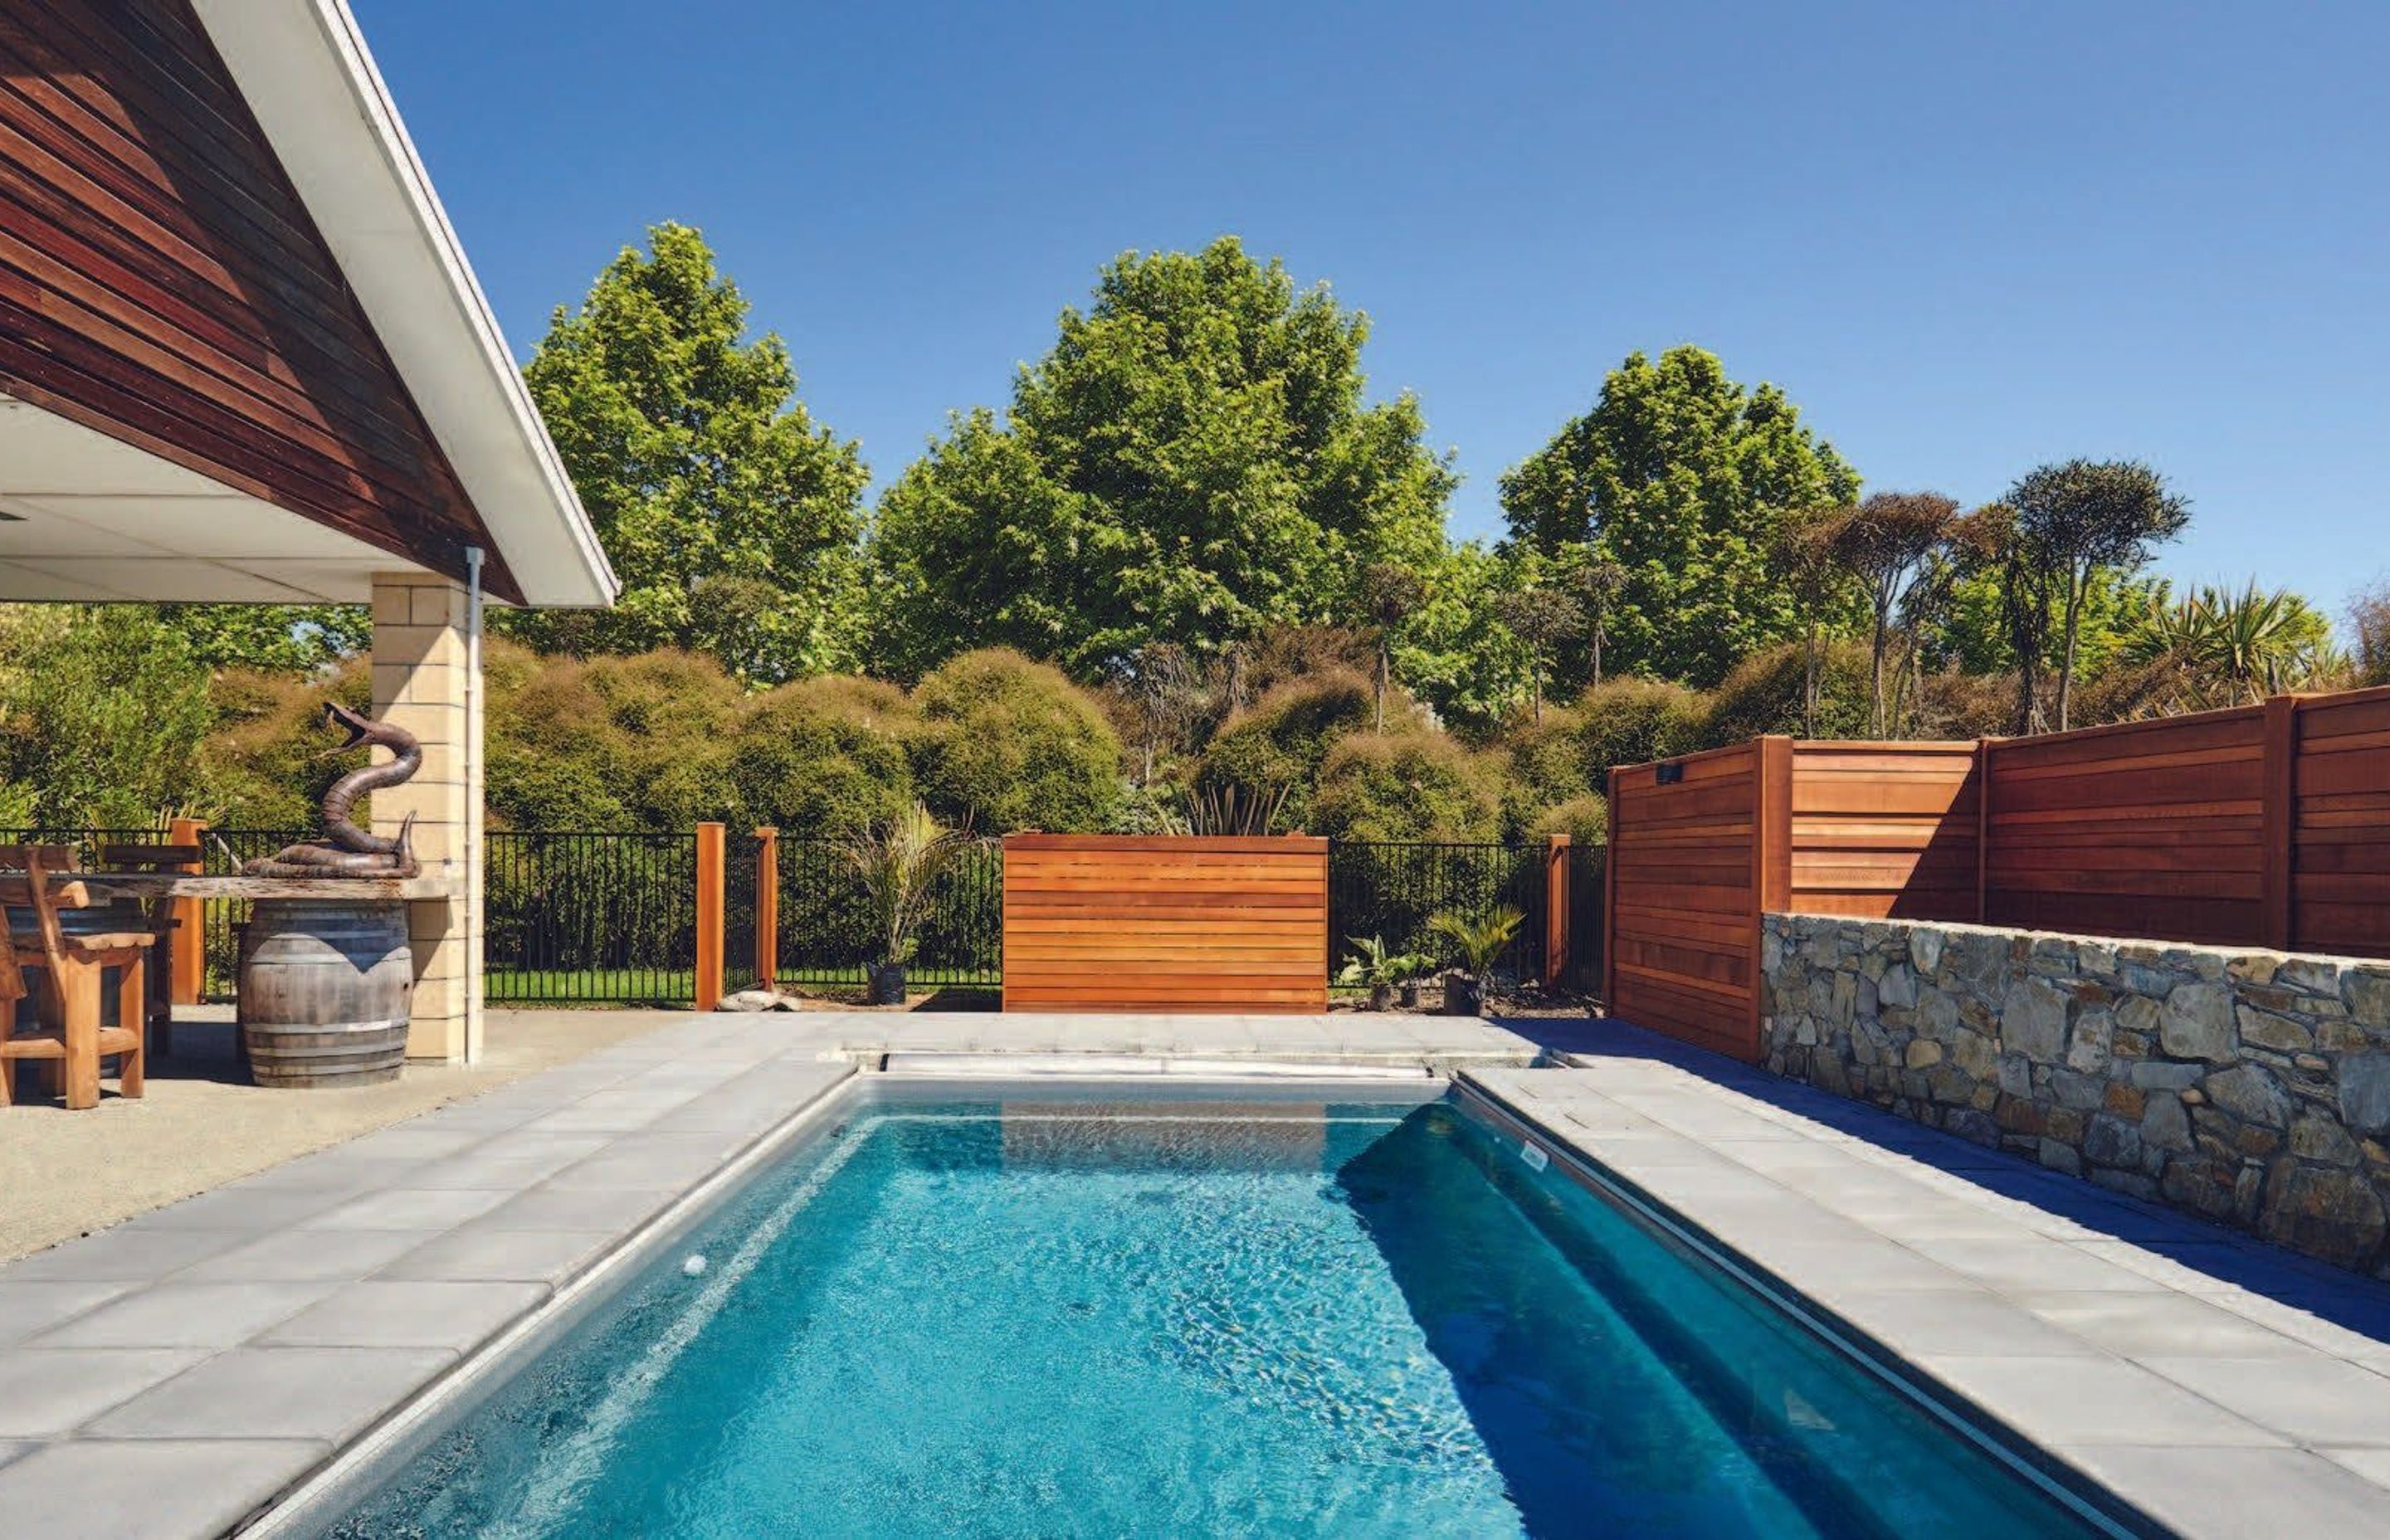 Creating and Landscaping Stunning Swimming Pools in the Top of the South